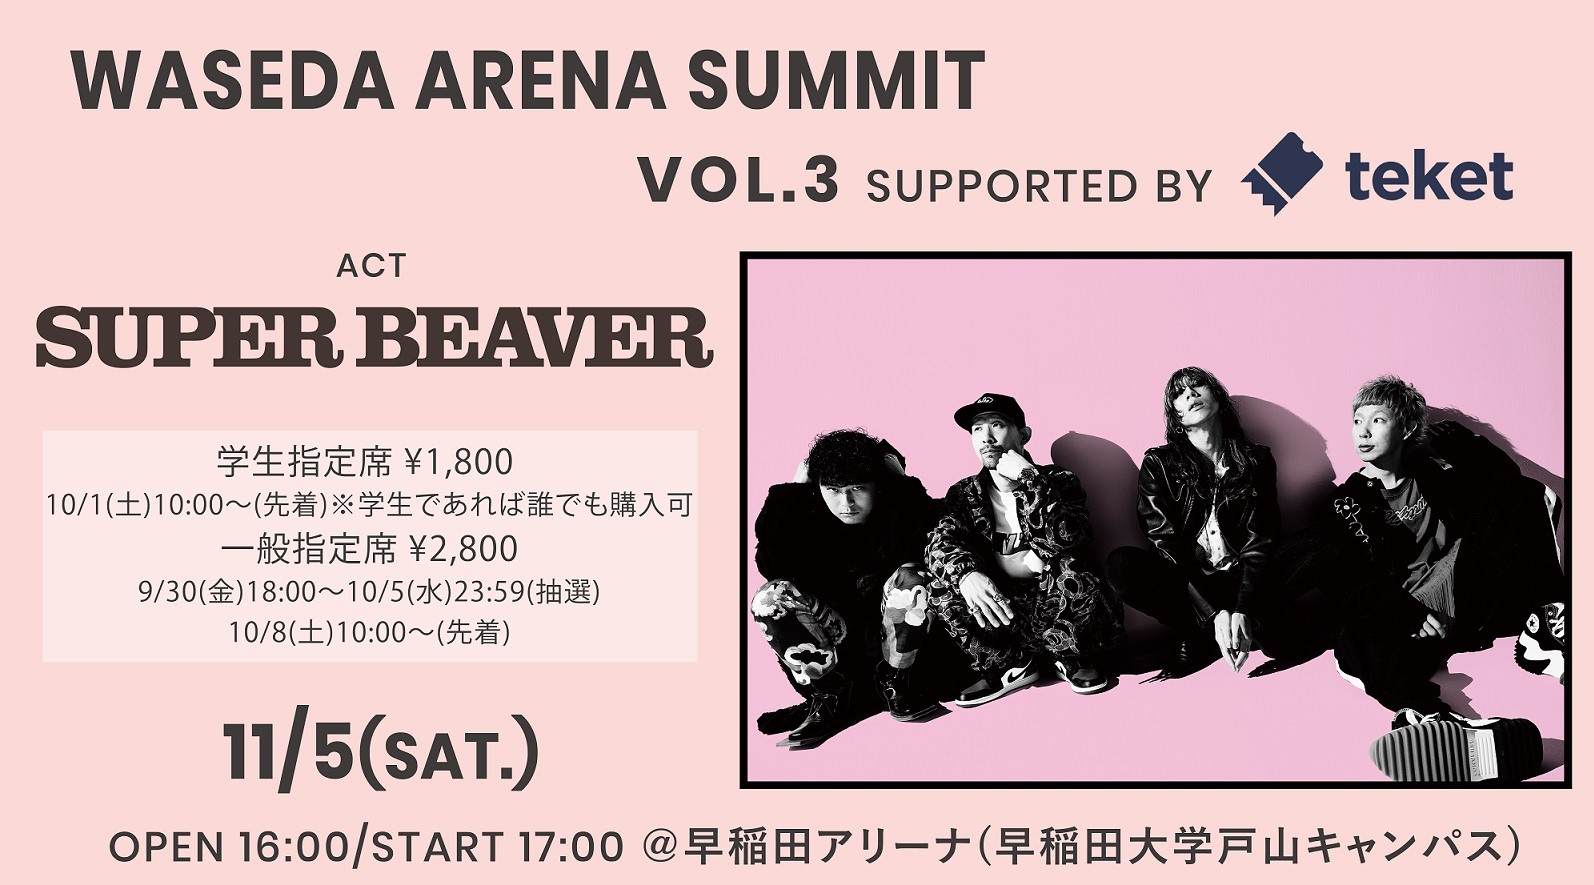 SUPER BEAVERが出演「WASEDA ARENA SUMMIT Vol.3 Supported by teket ...